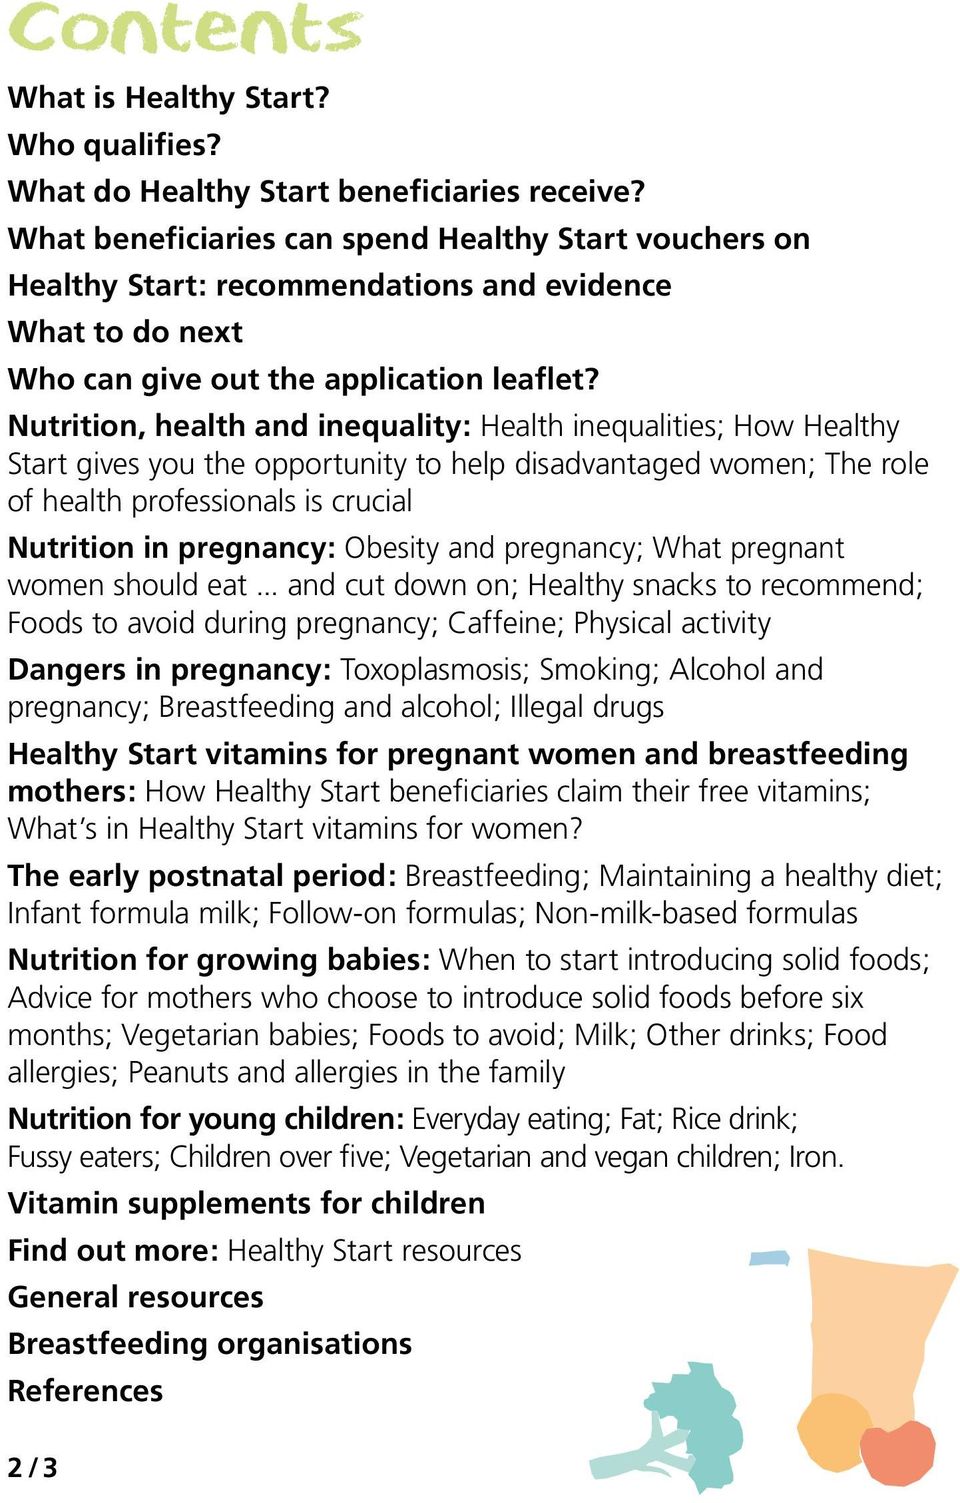 Nutrition, health and inequality:healthinequalities;howhealthy Startgivesyoutheopportunitytohelpdisadvantagedwomen;Therole ofhealthprofessionalsiscrucial Nutrition in